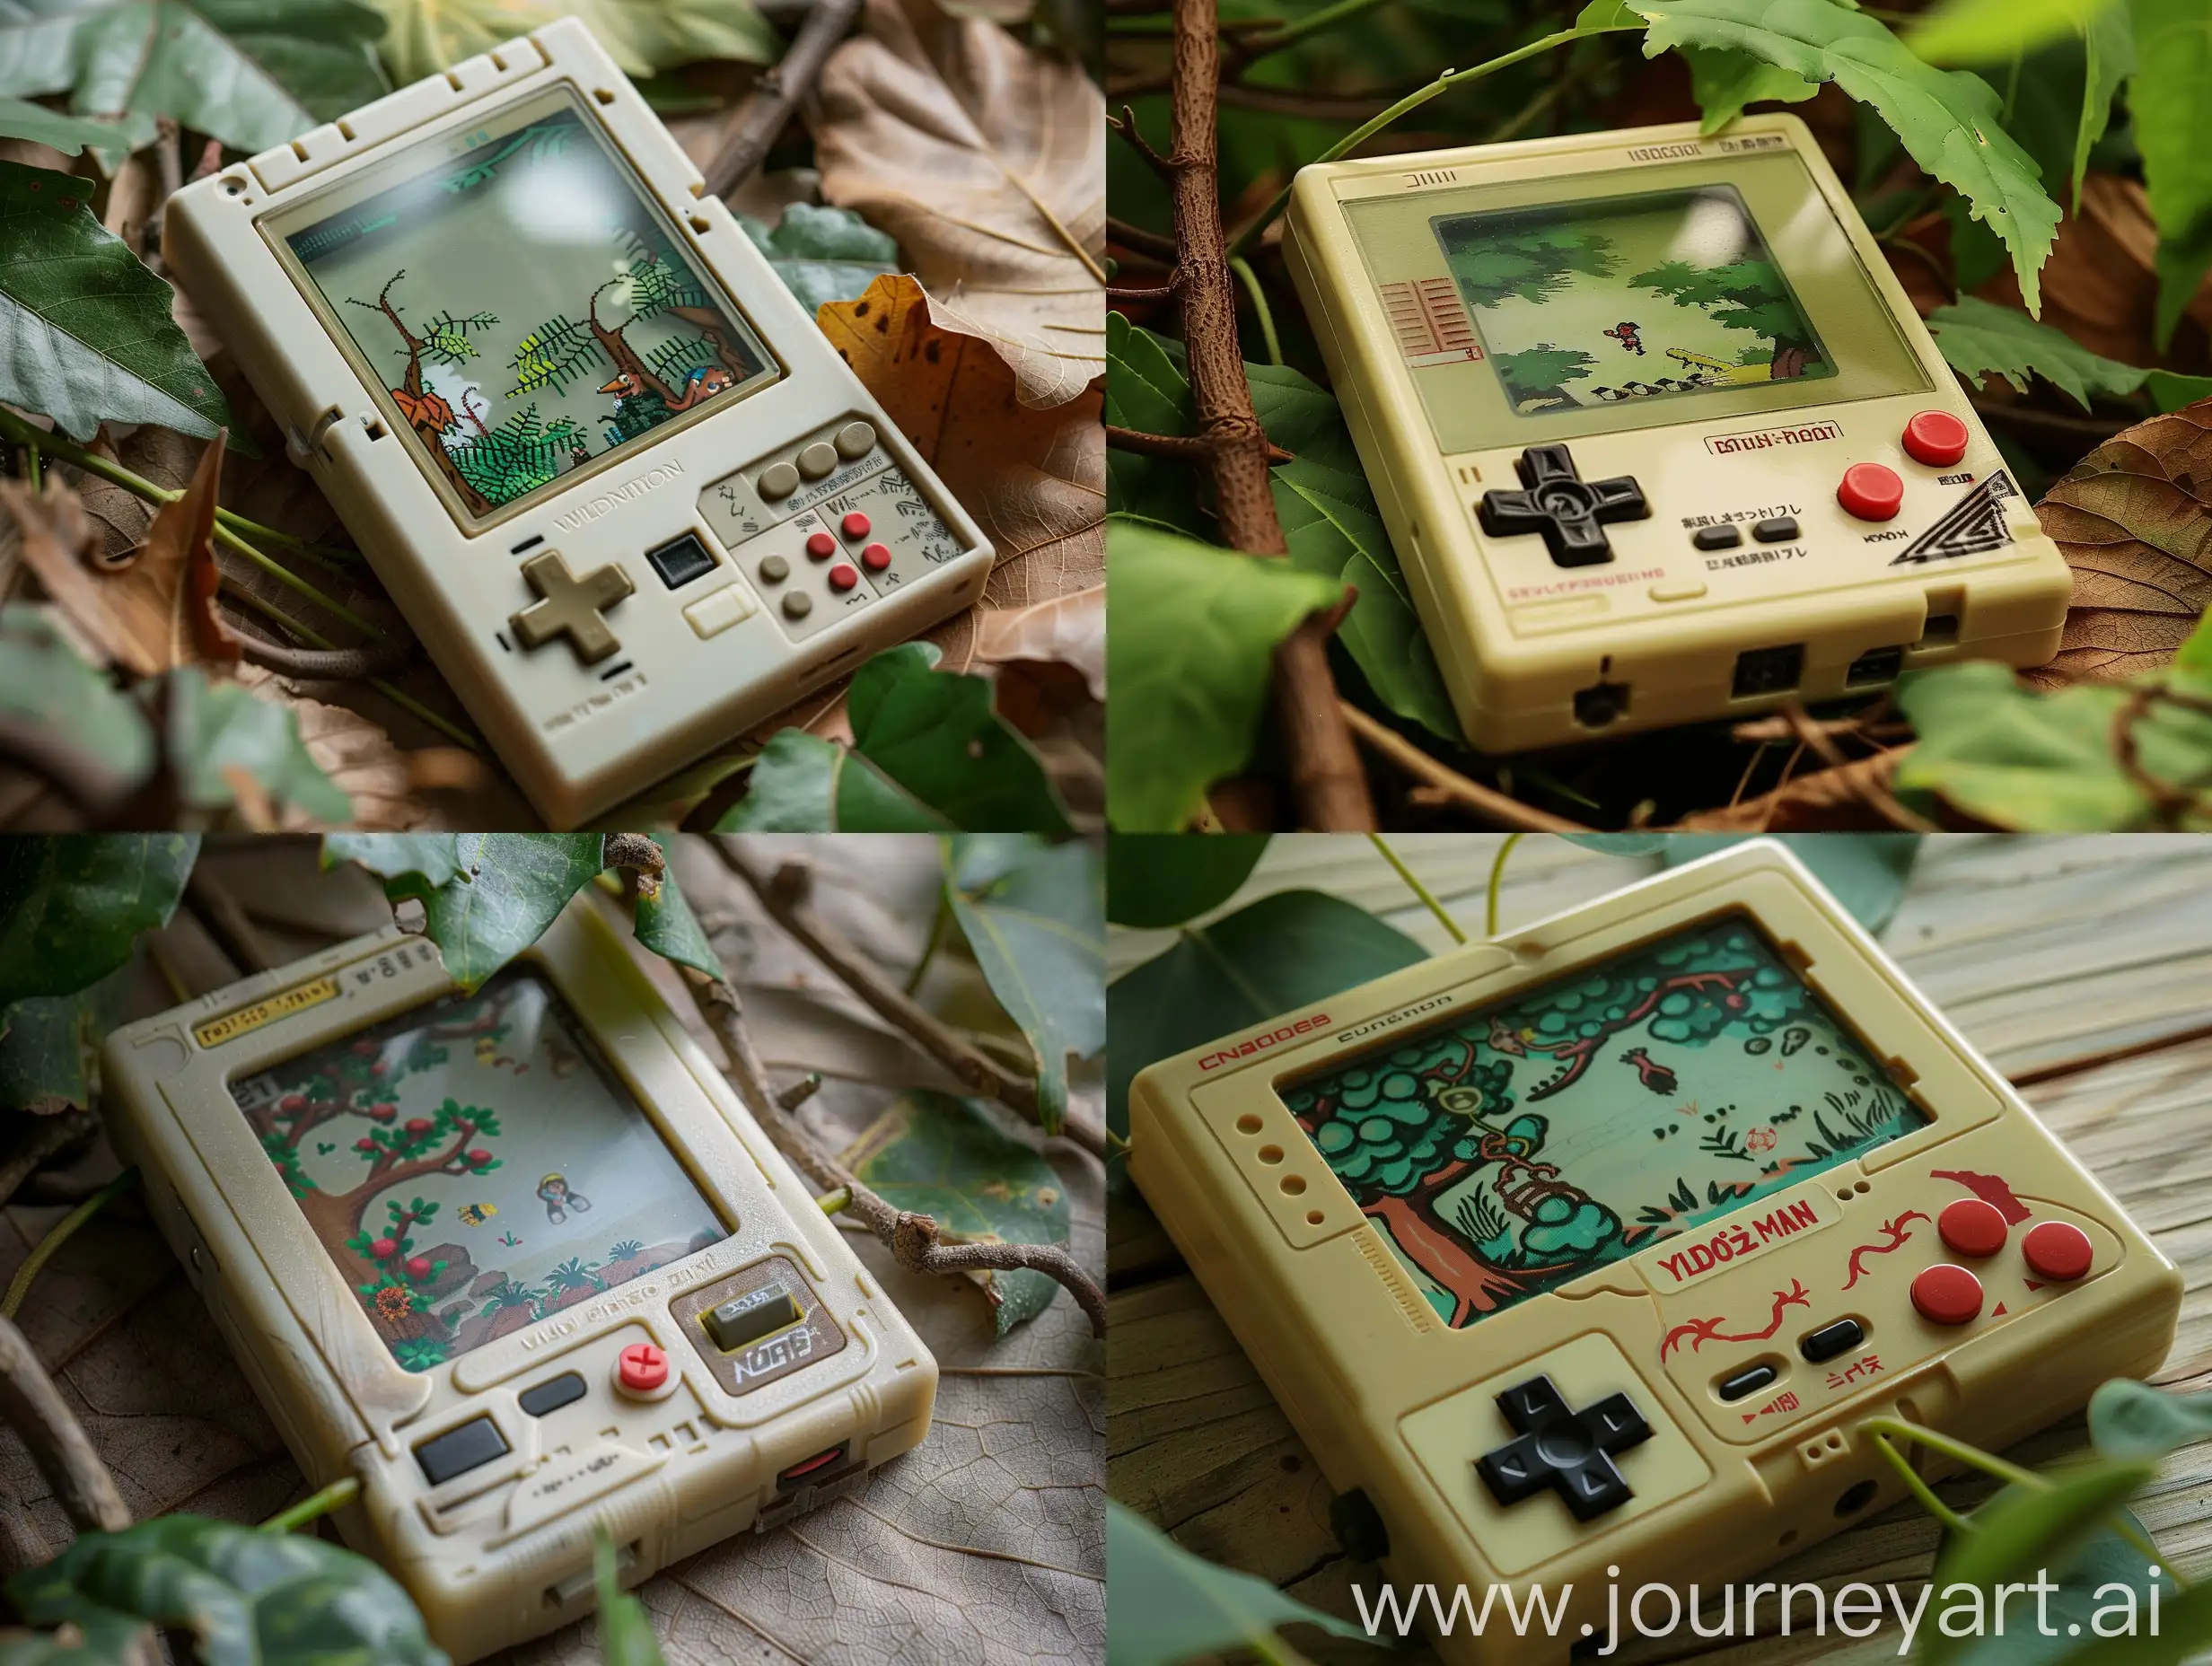 80s handheld electronic games, created by Nintendo designer Gunpei Yokoi. There is an LCD screen in the center. It is played with a button on the left and a button on the right. There are usually other buttons on it. The content of the game is about a little wild man playing in the forest. Cling to tree vines, avoid traps and save the girl